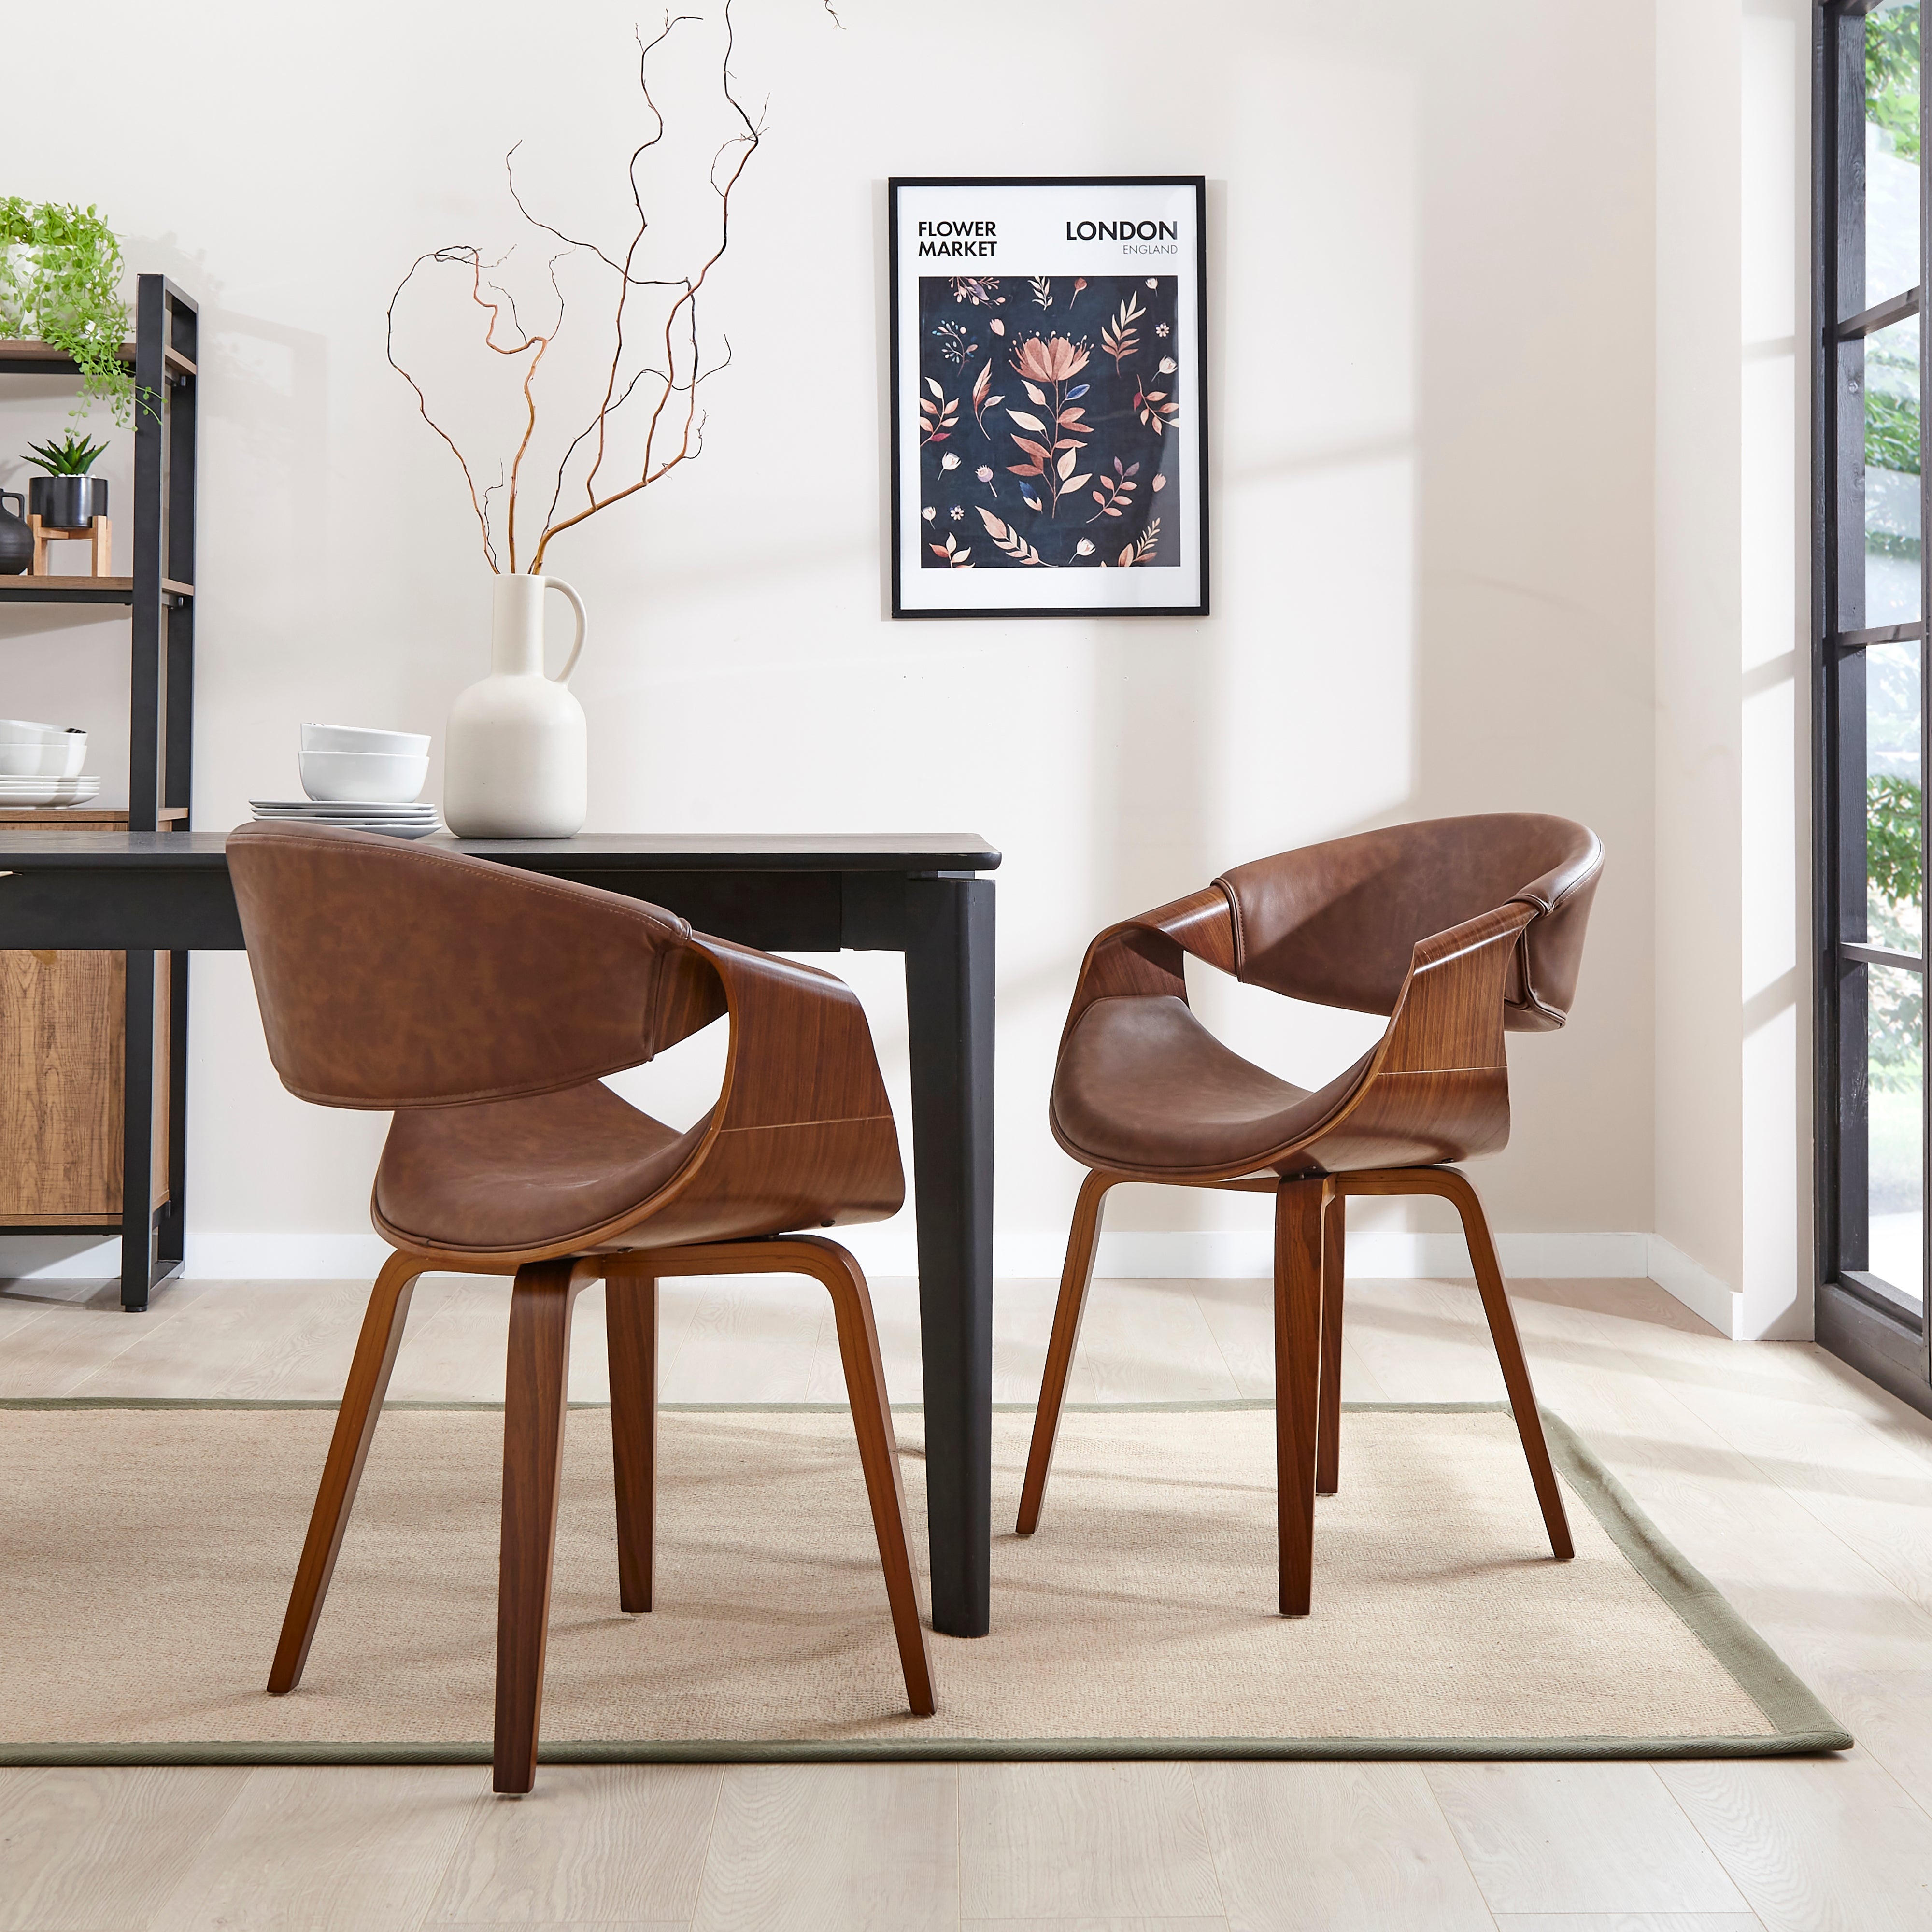 Modena Dining Chair, Faux Leather